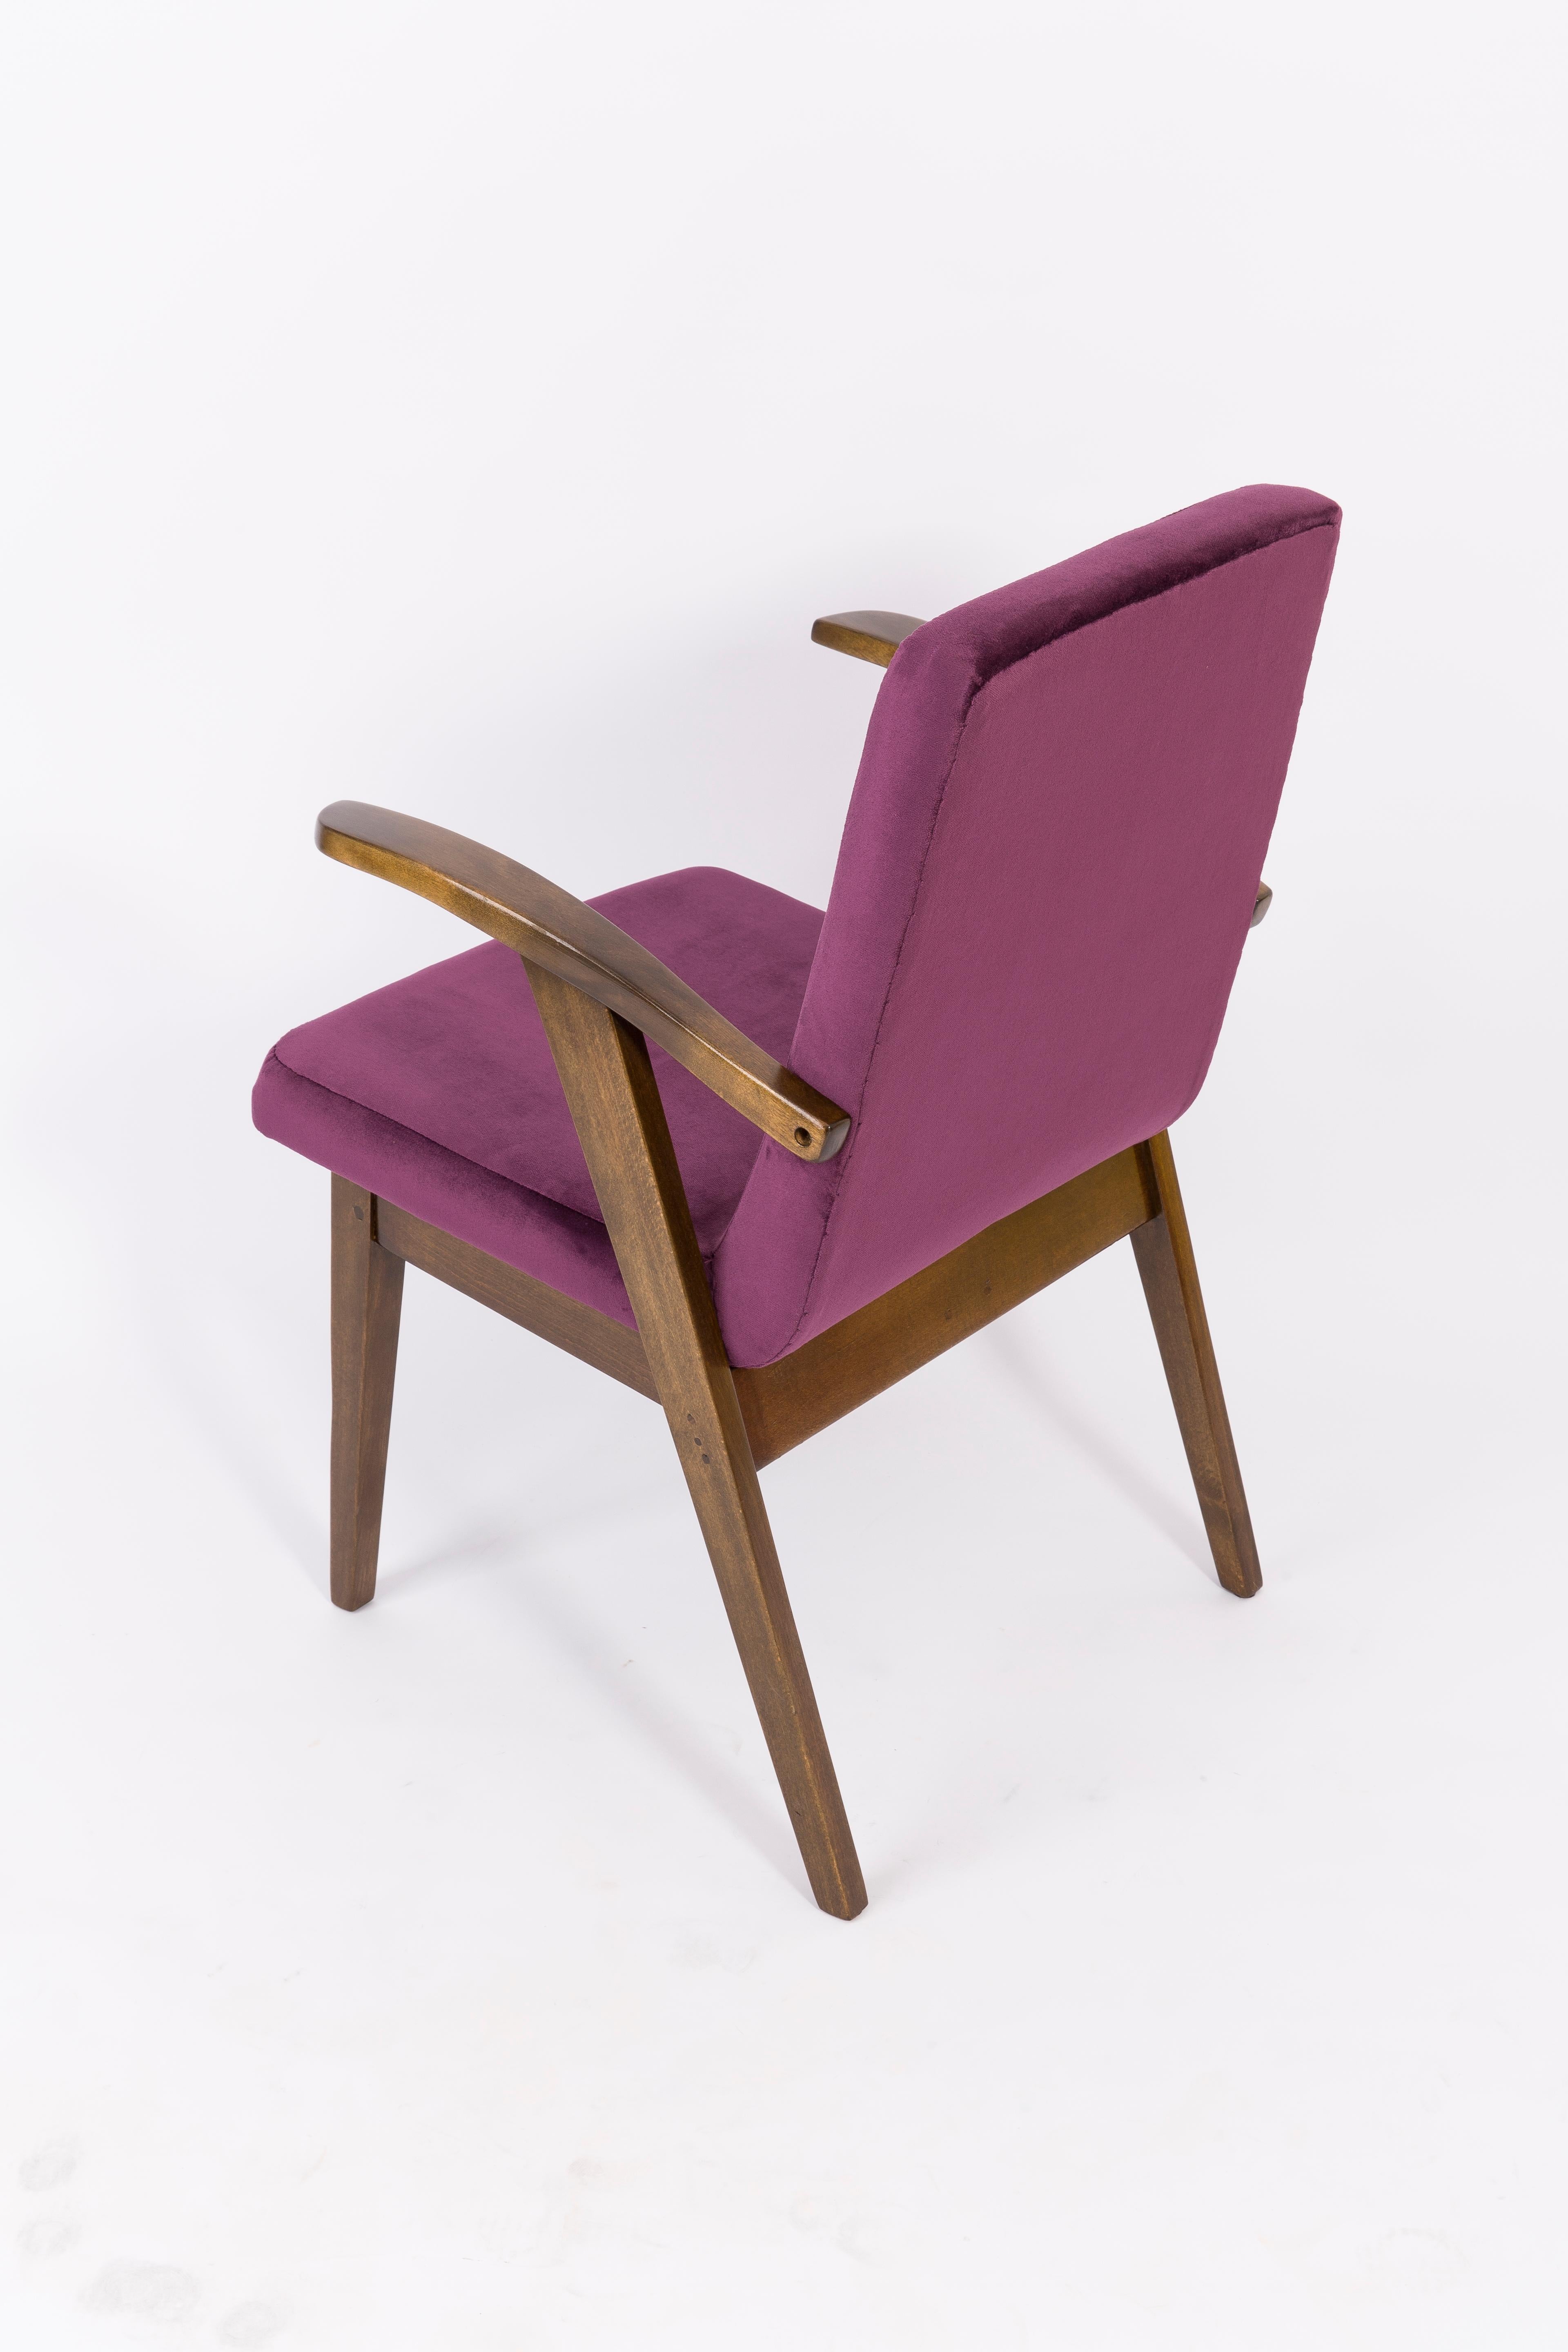 Hand-Crafted 20th Century Vintage Plum Violet Armchair by Mieczyslaw Puchala, 1960s For Sale